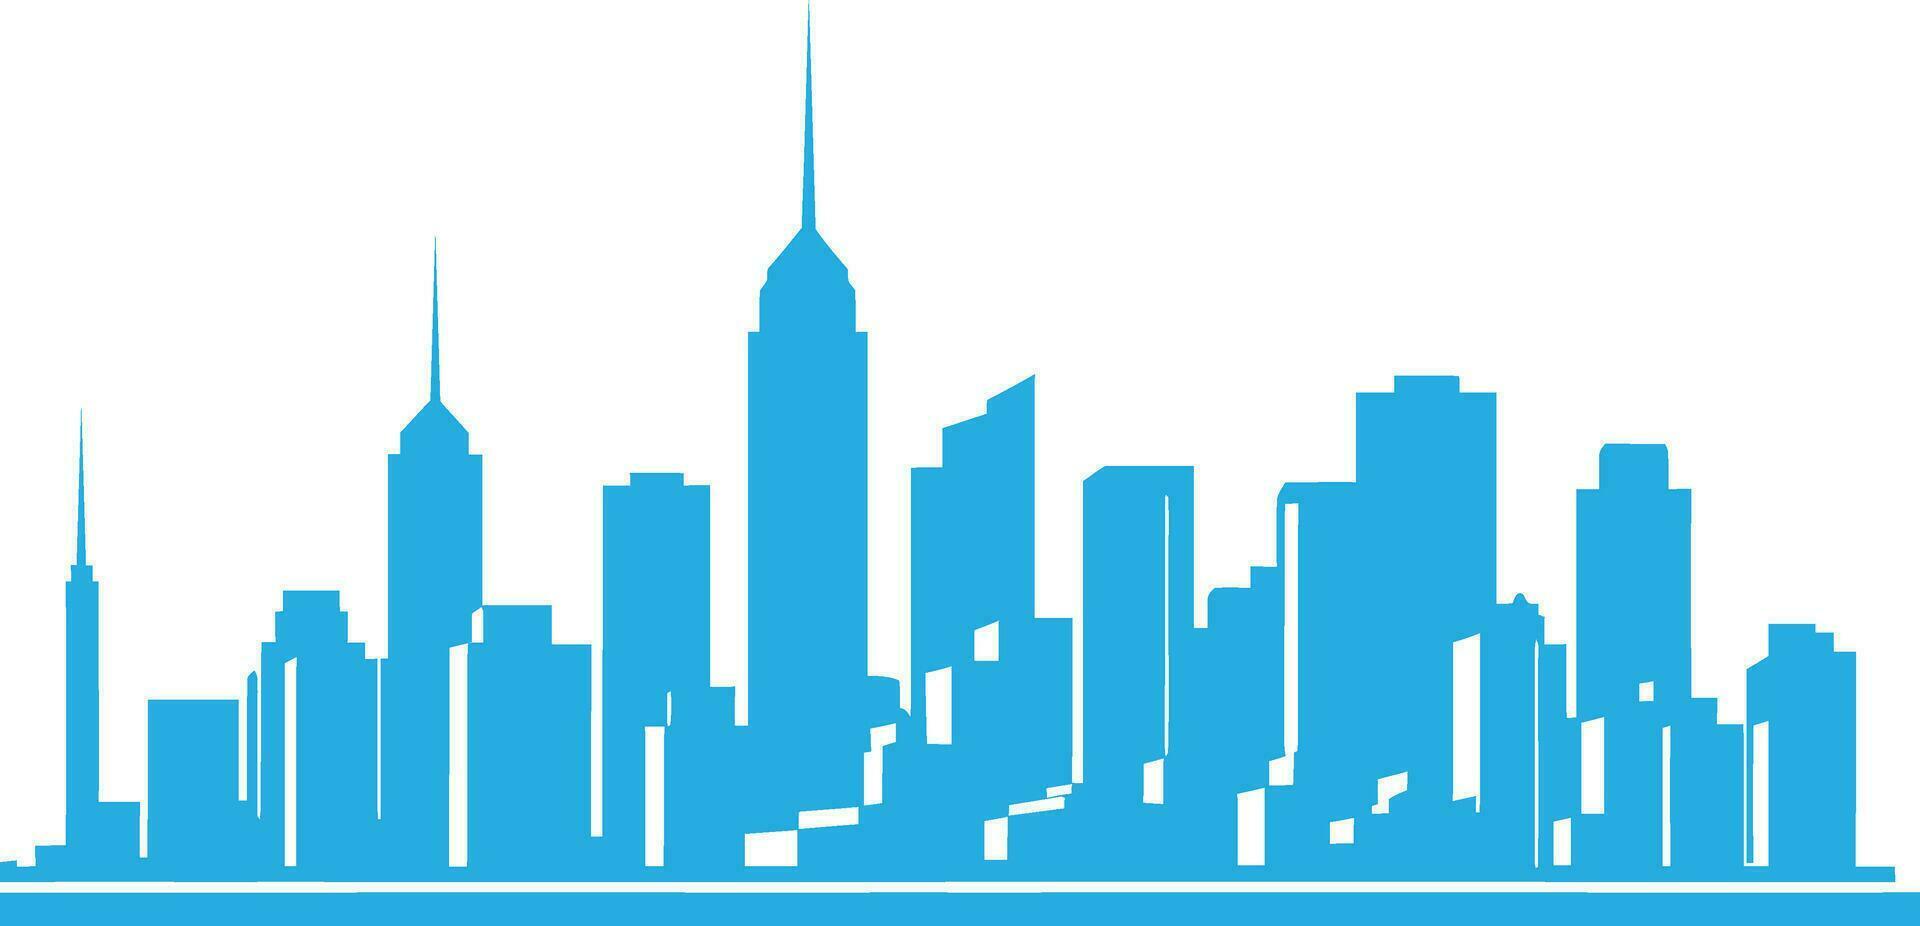 Urban Skyline Illustrations   Modern Cityscape Graphics for Design Projects vector